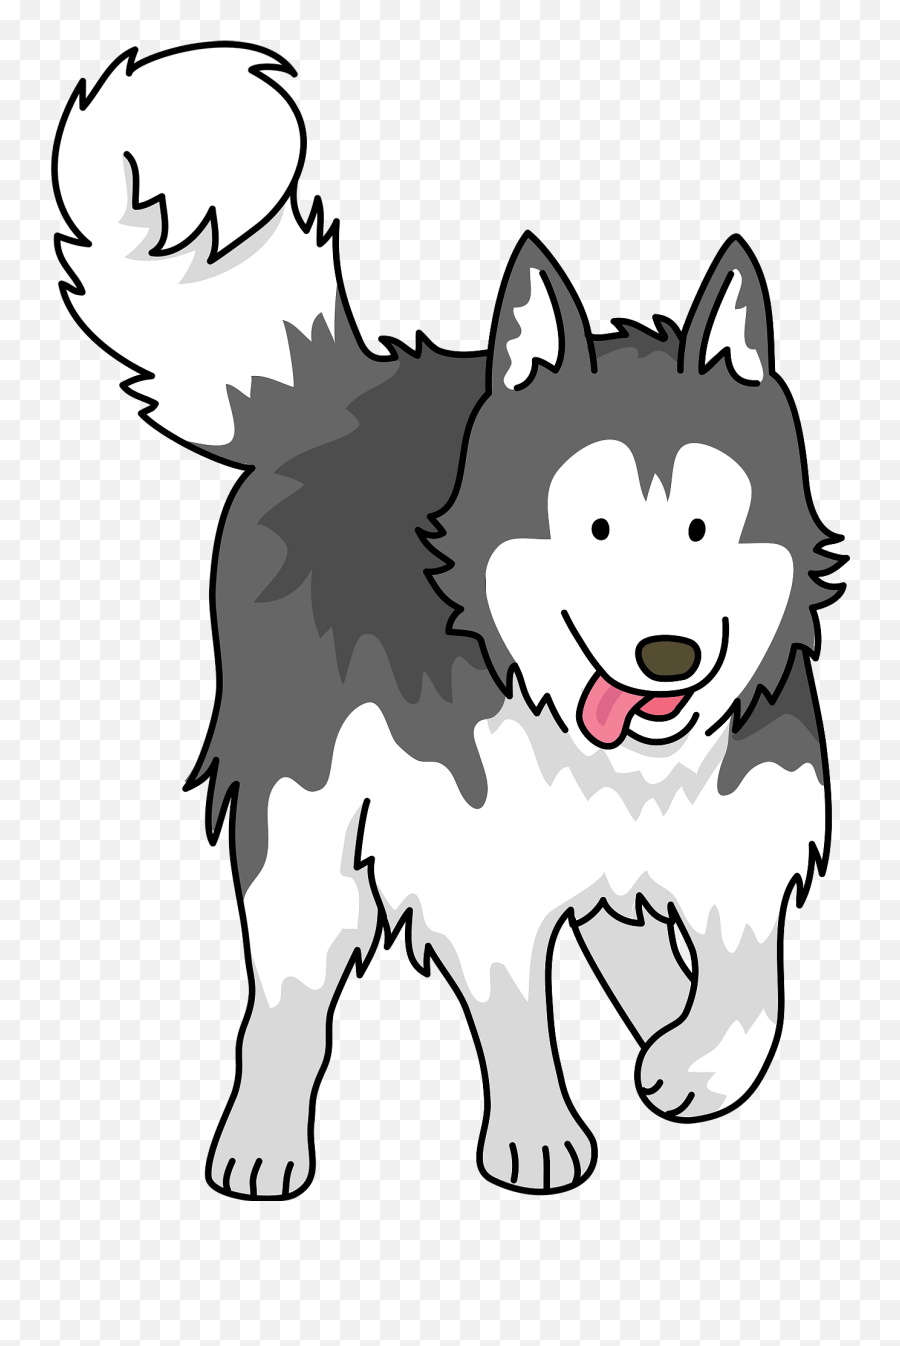 Siberian Husky Dog Clipart Free Download Transparent Png Emoji,Dogs Clipart Black And White